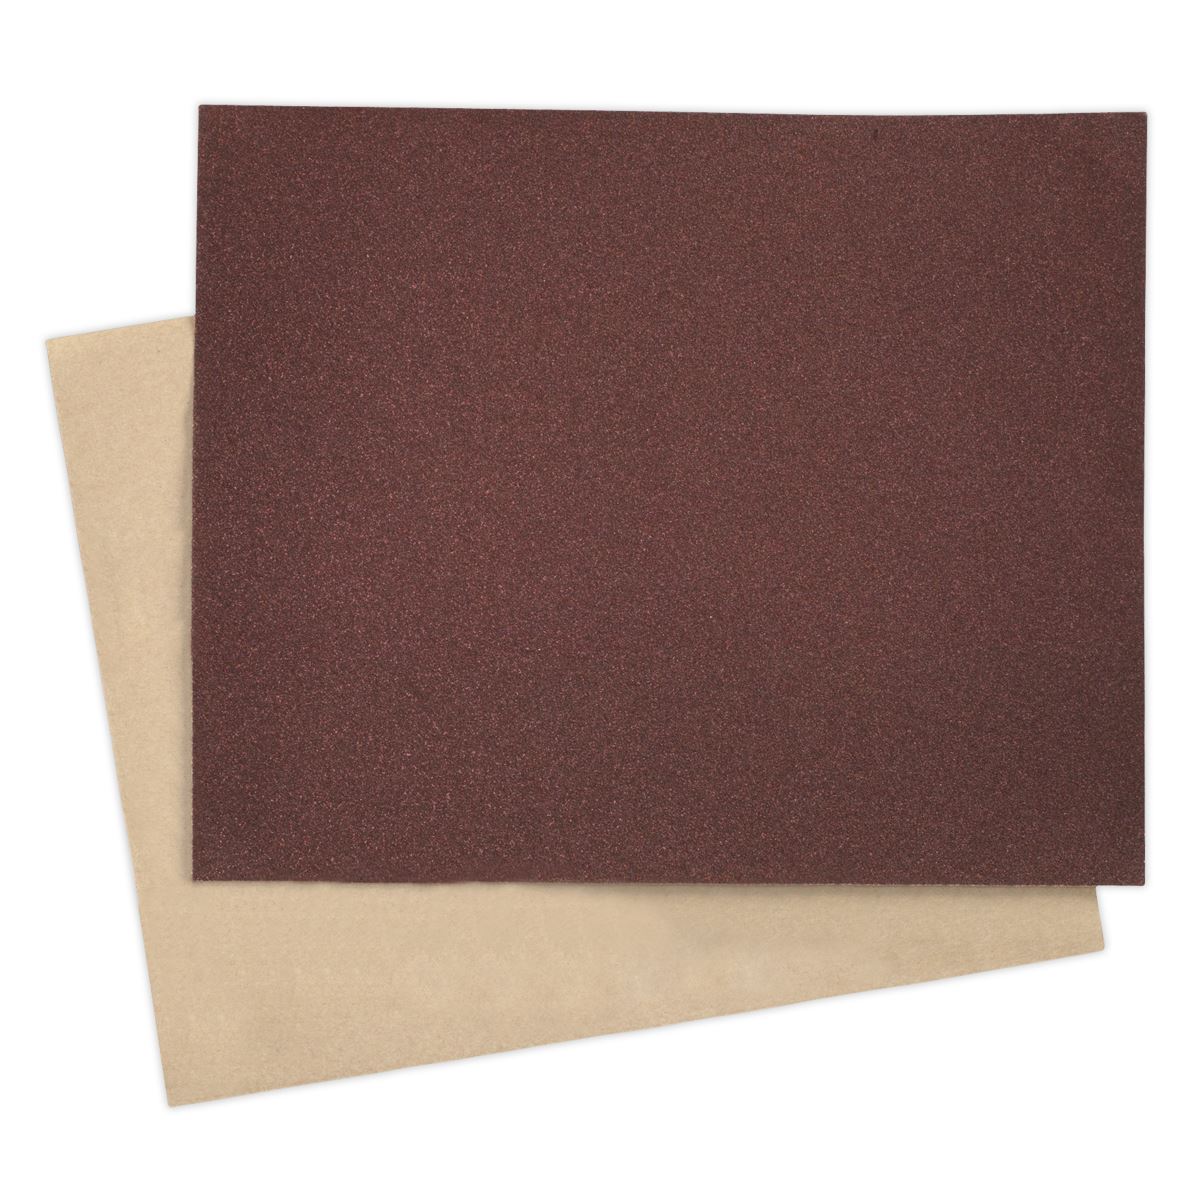 Sealey Production Paper 230 x 280mm 60Grit Pack of 25